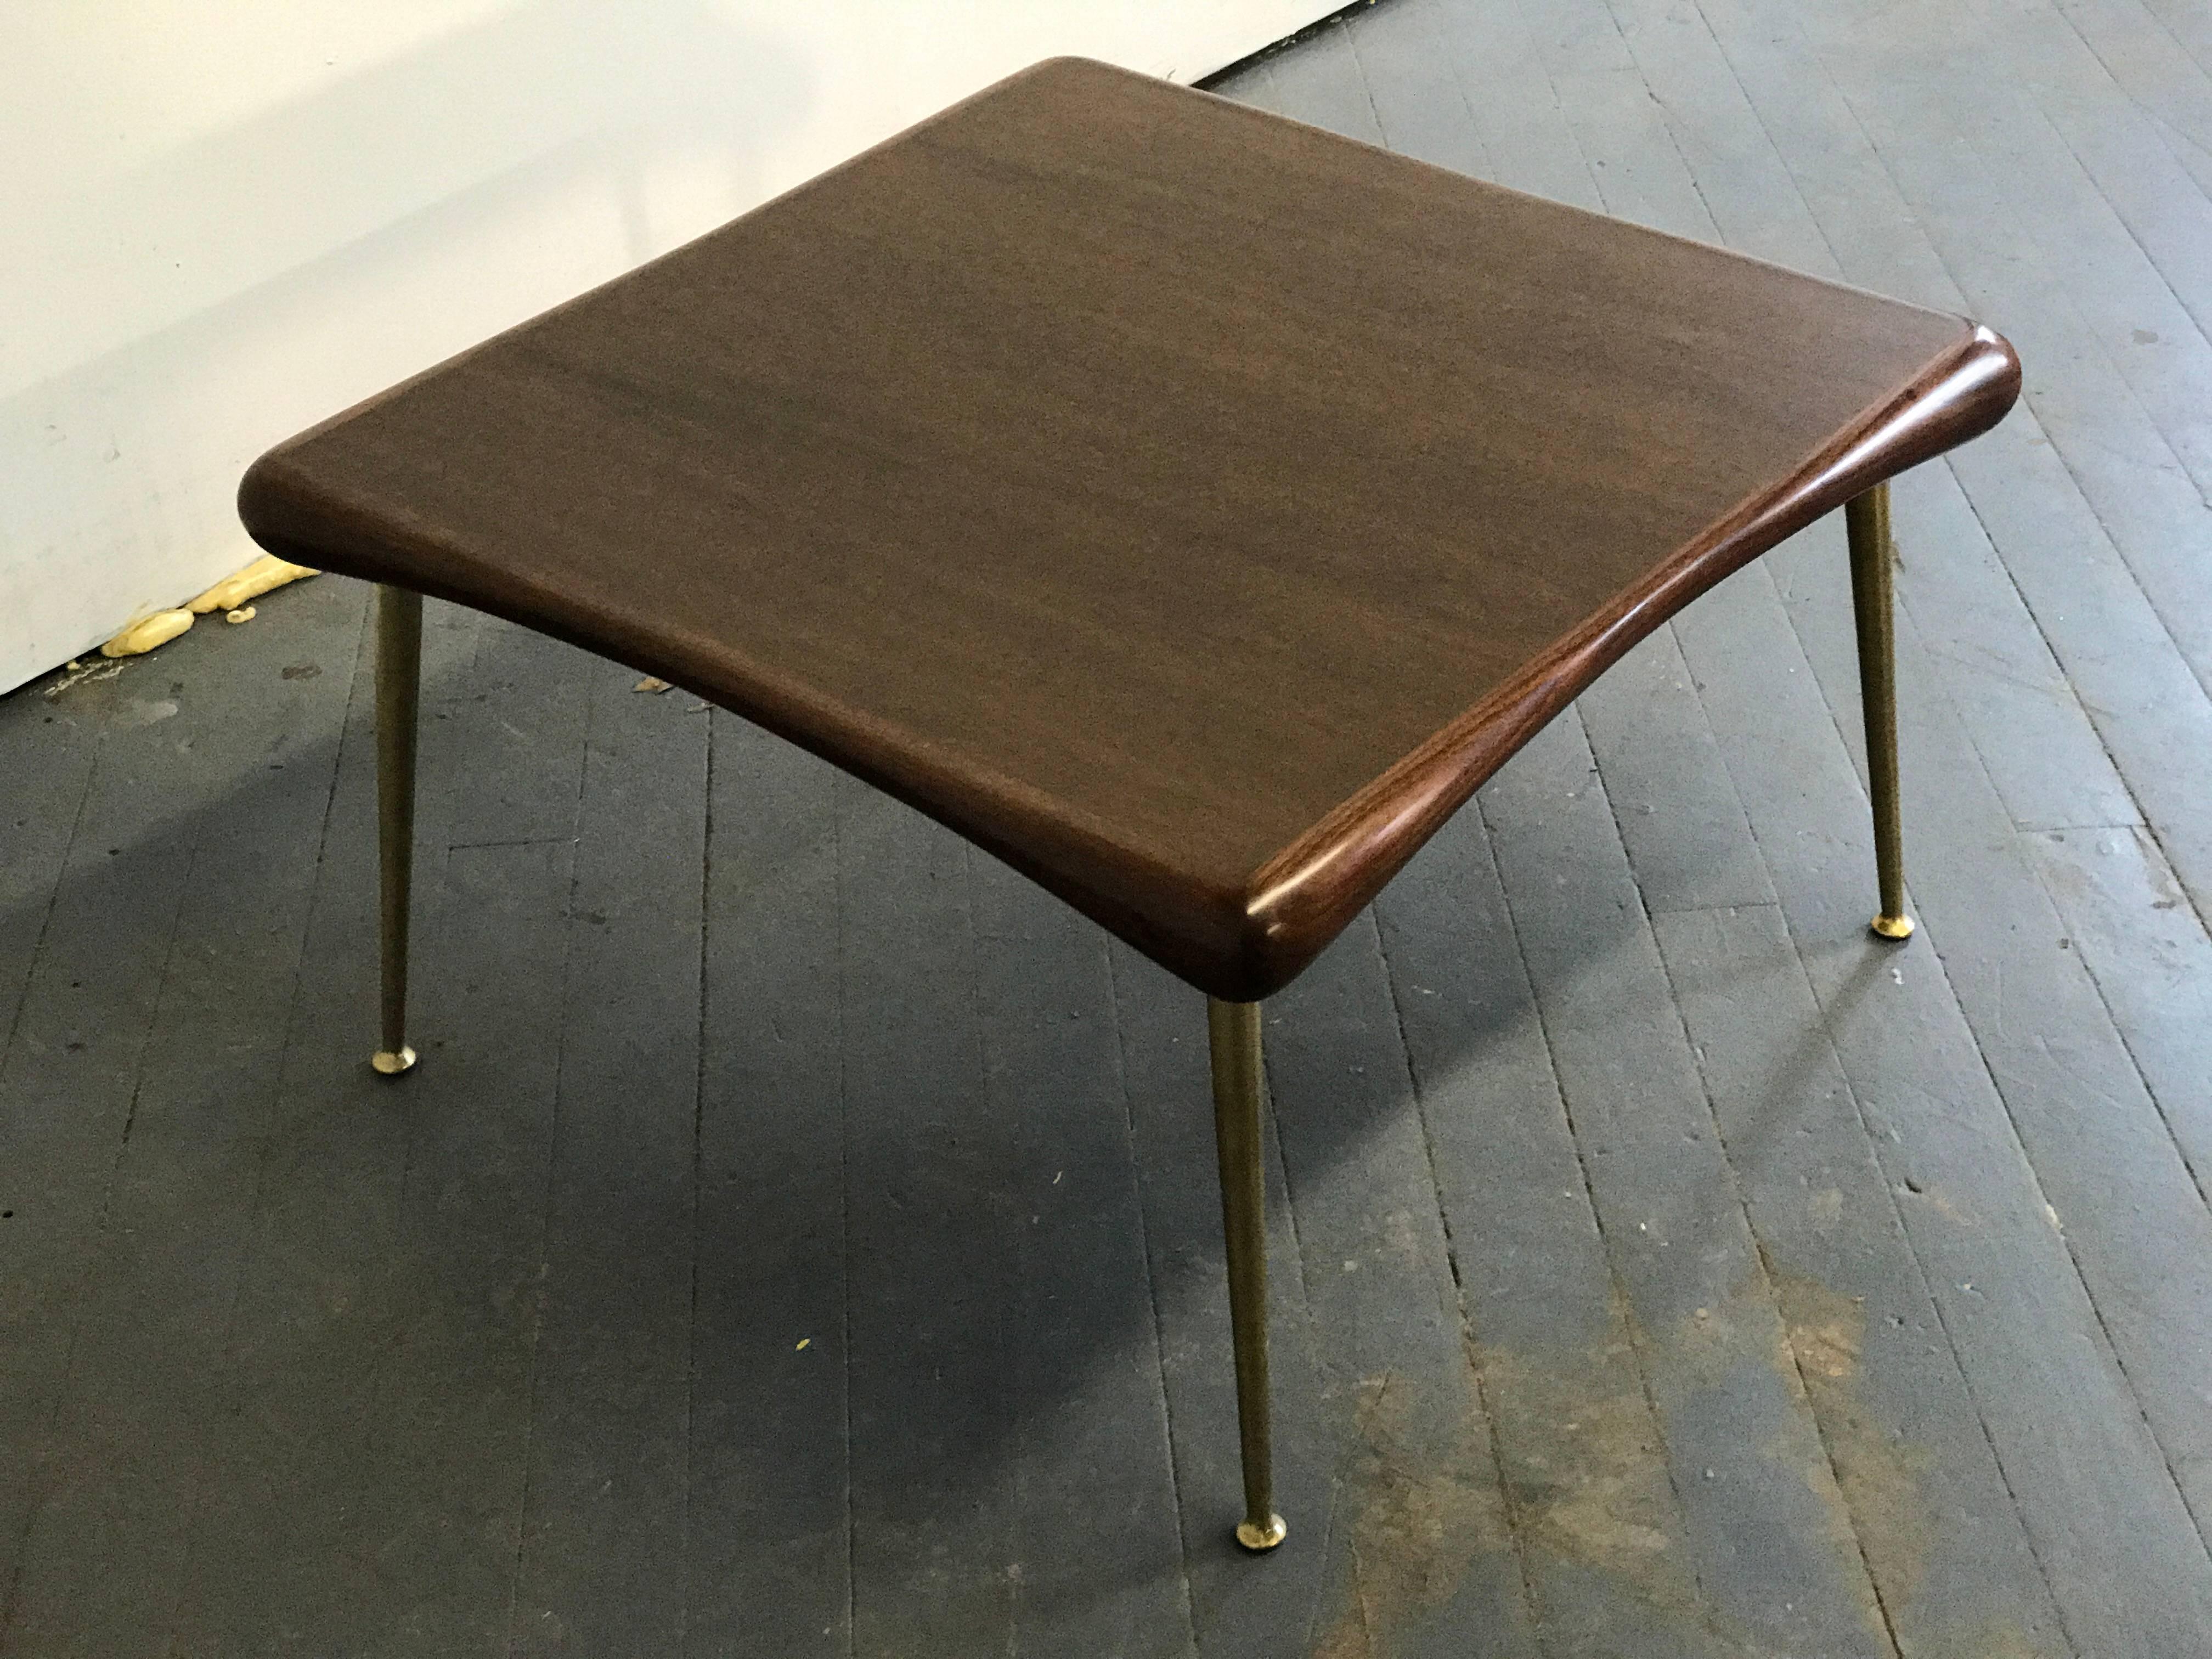 Organic curved edges , newly restored early Robsjohn-Gibbings 1950s walnut and bronze legs coffee or side table made by Widdicomb

 